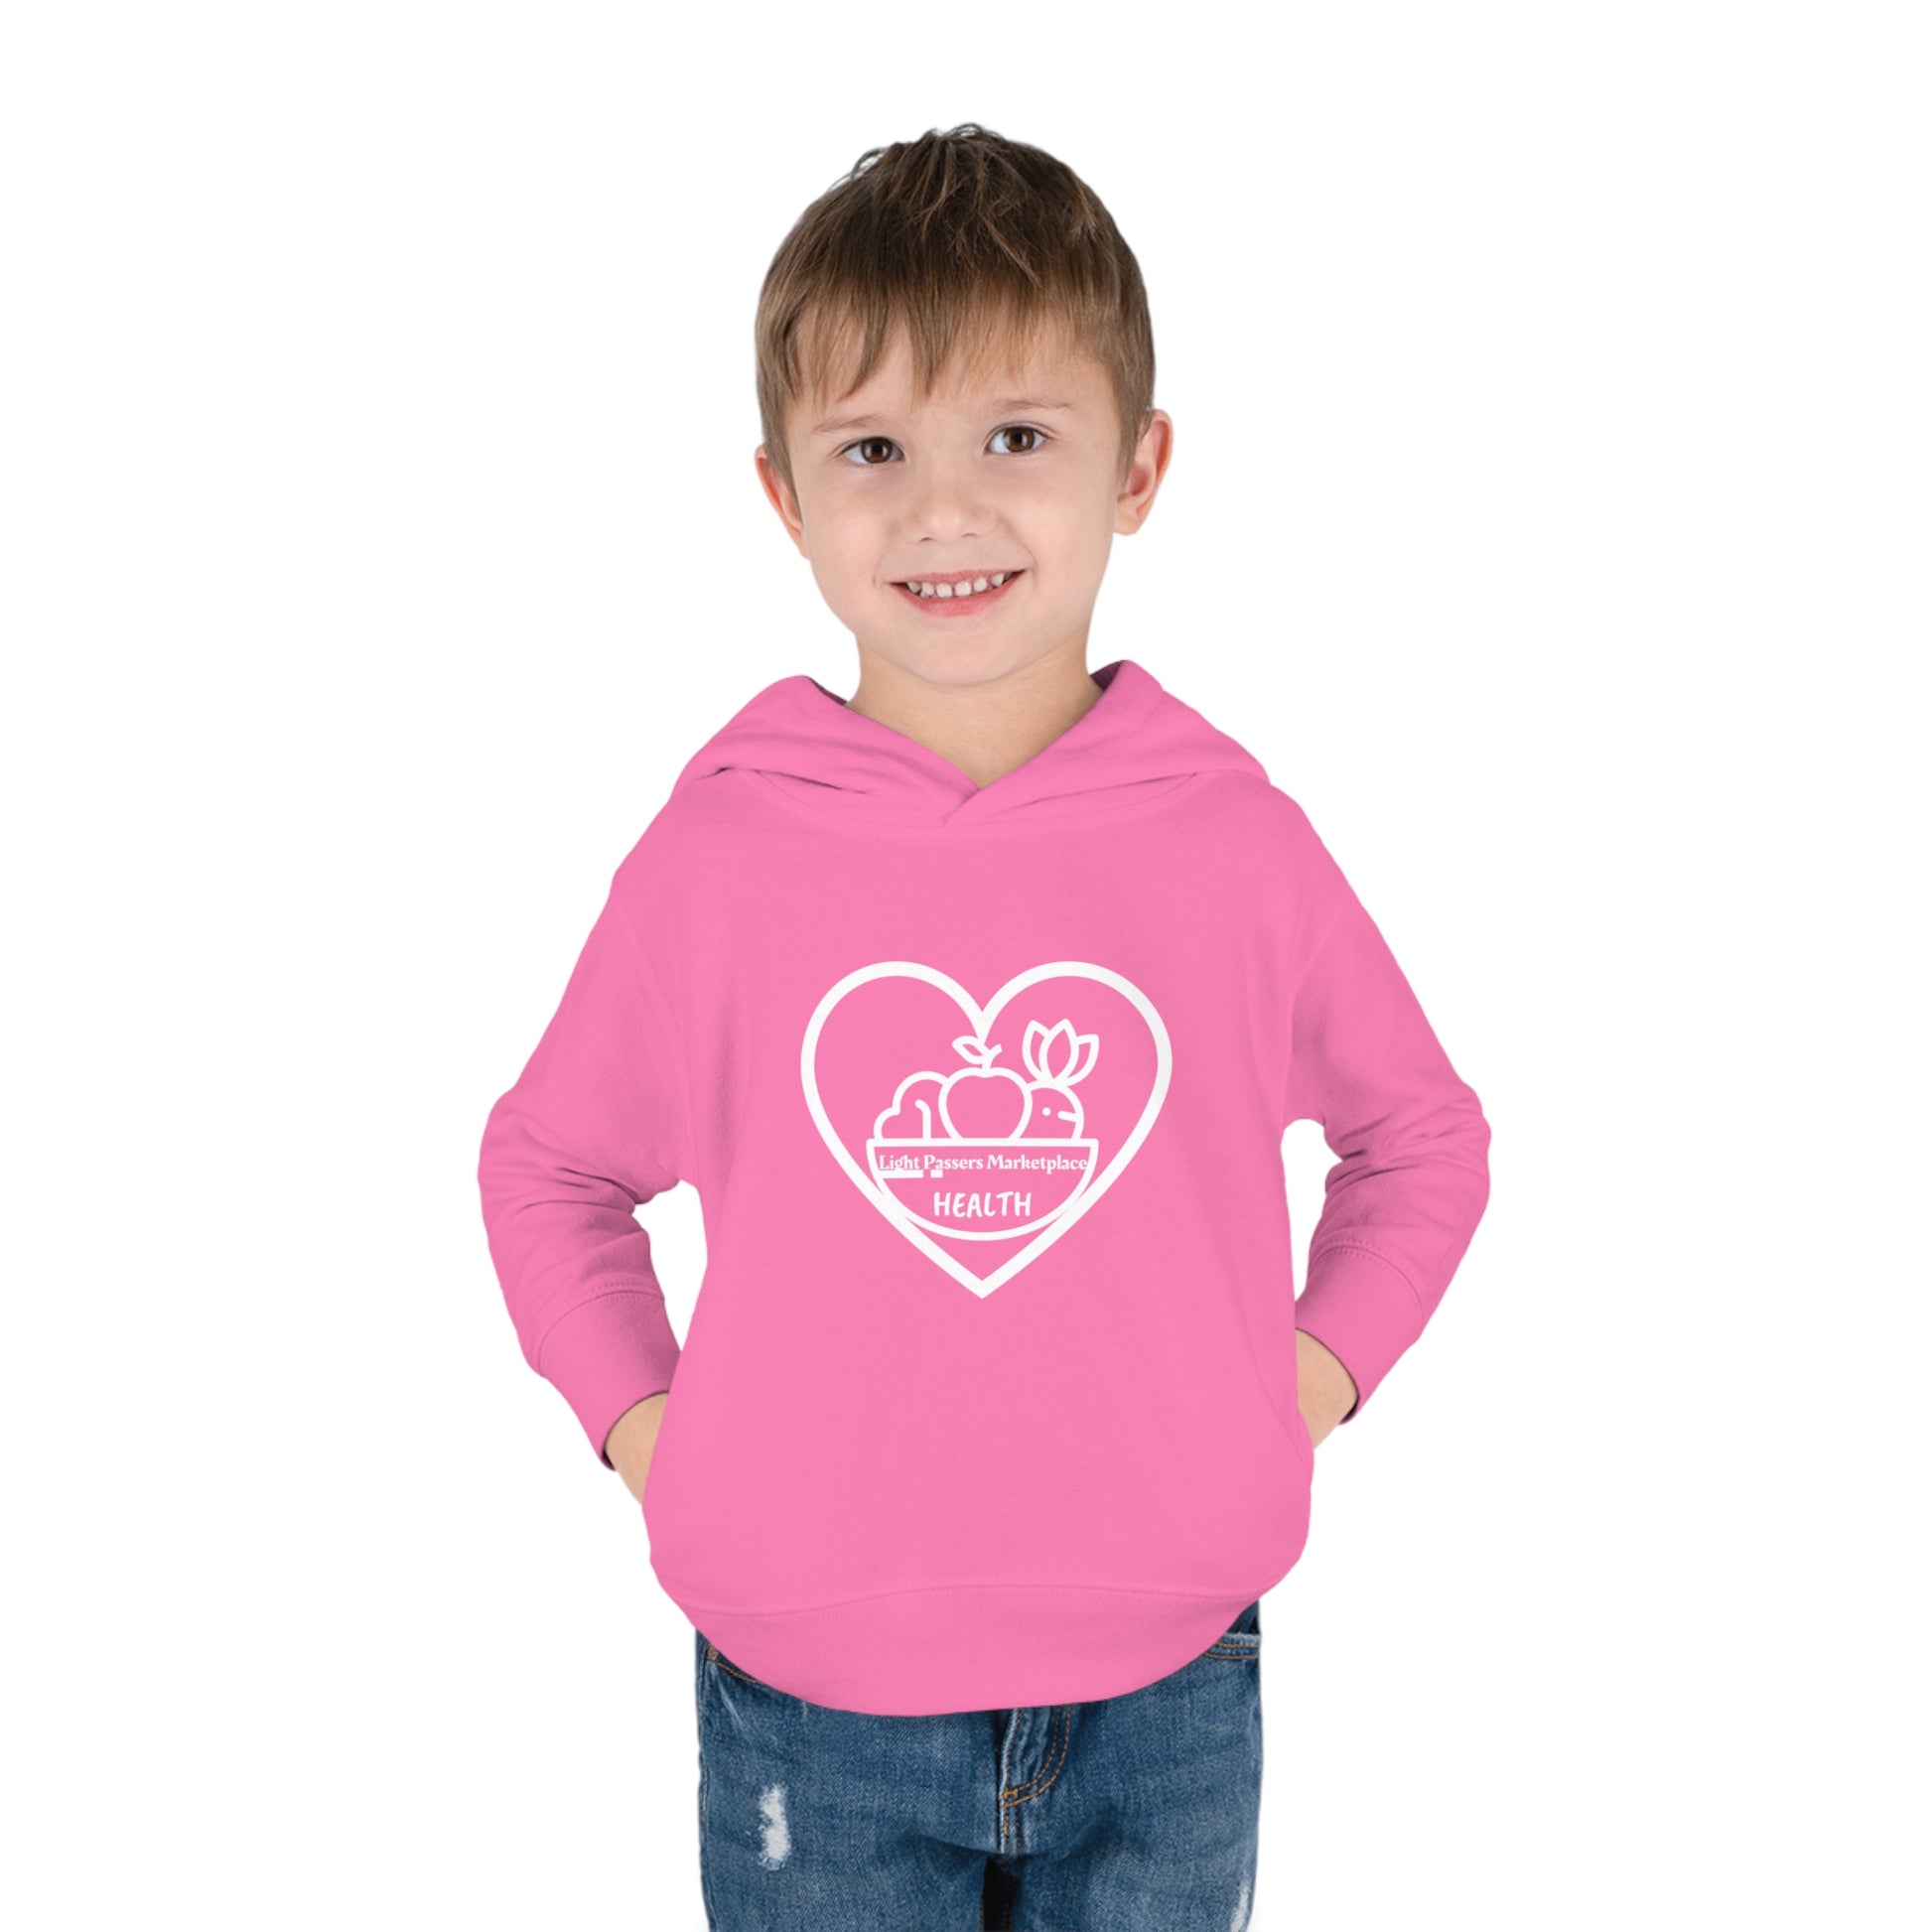 A toddler wearing a pink Fruit Basket Toddler Hoodie with side seam pockets, double-needle hem hood, and cover-stitched details for durability and comfort.